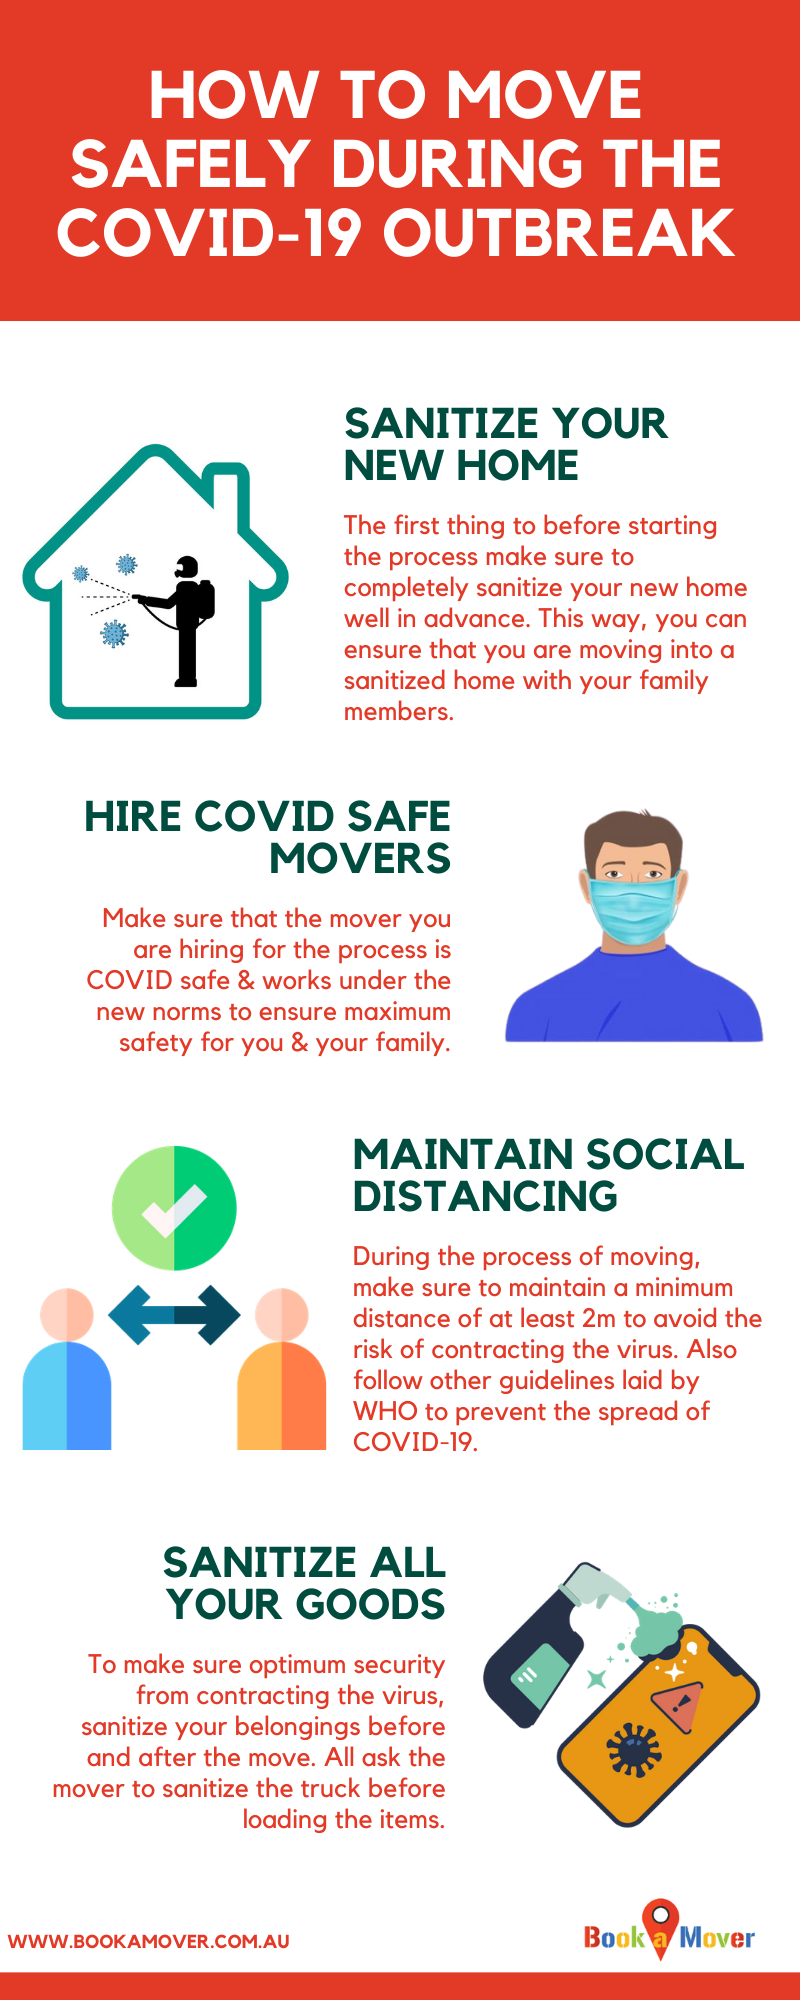 HOW TO MOVE SAFELY DURING THE COVID-19 OUTBREAK